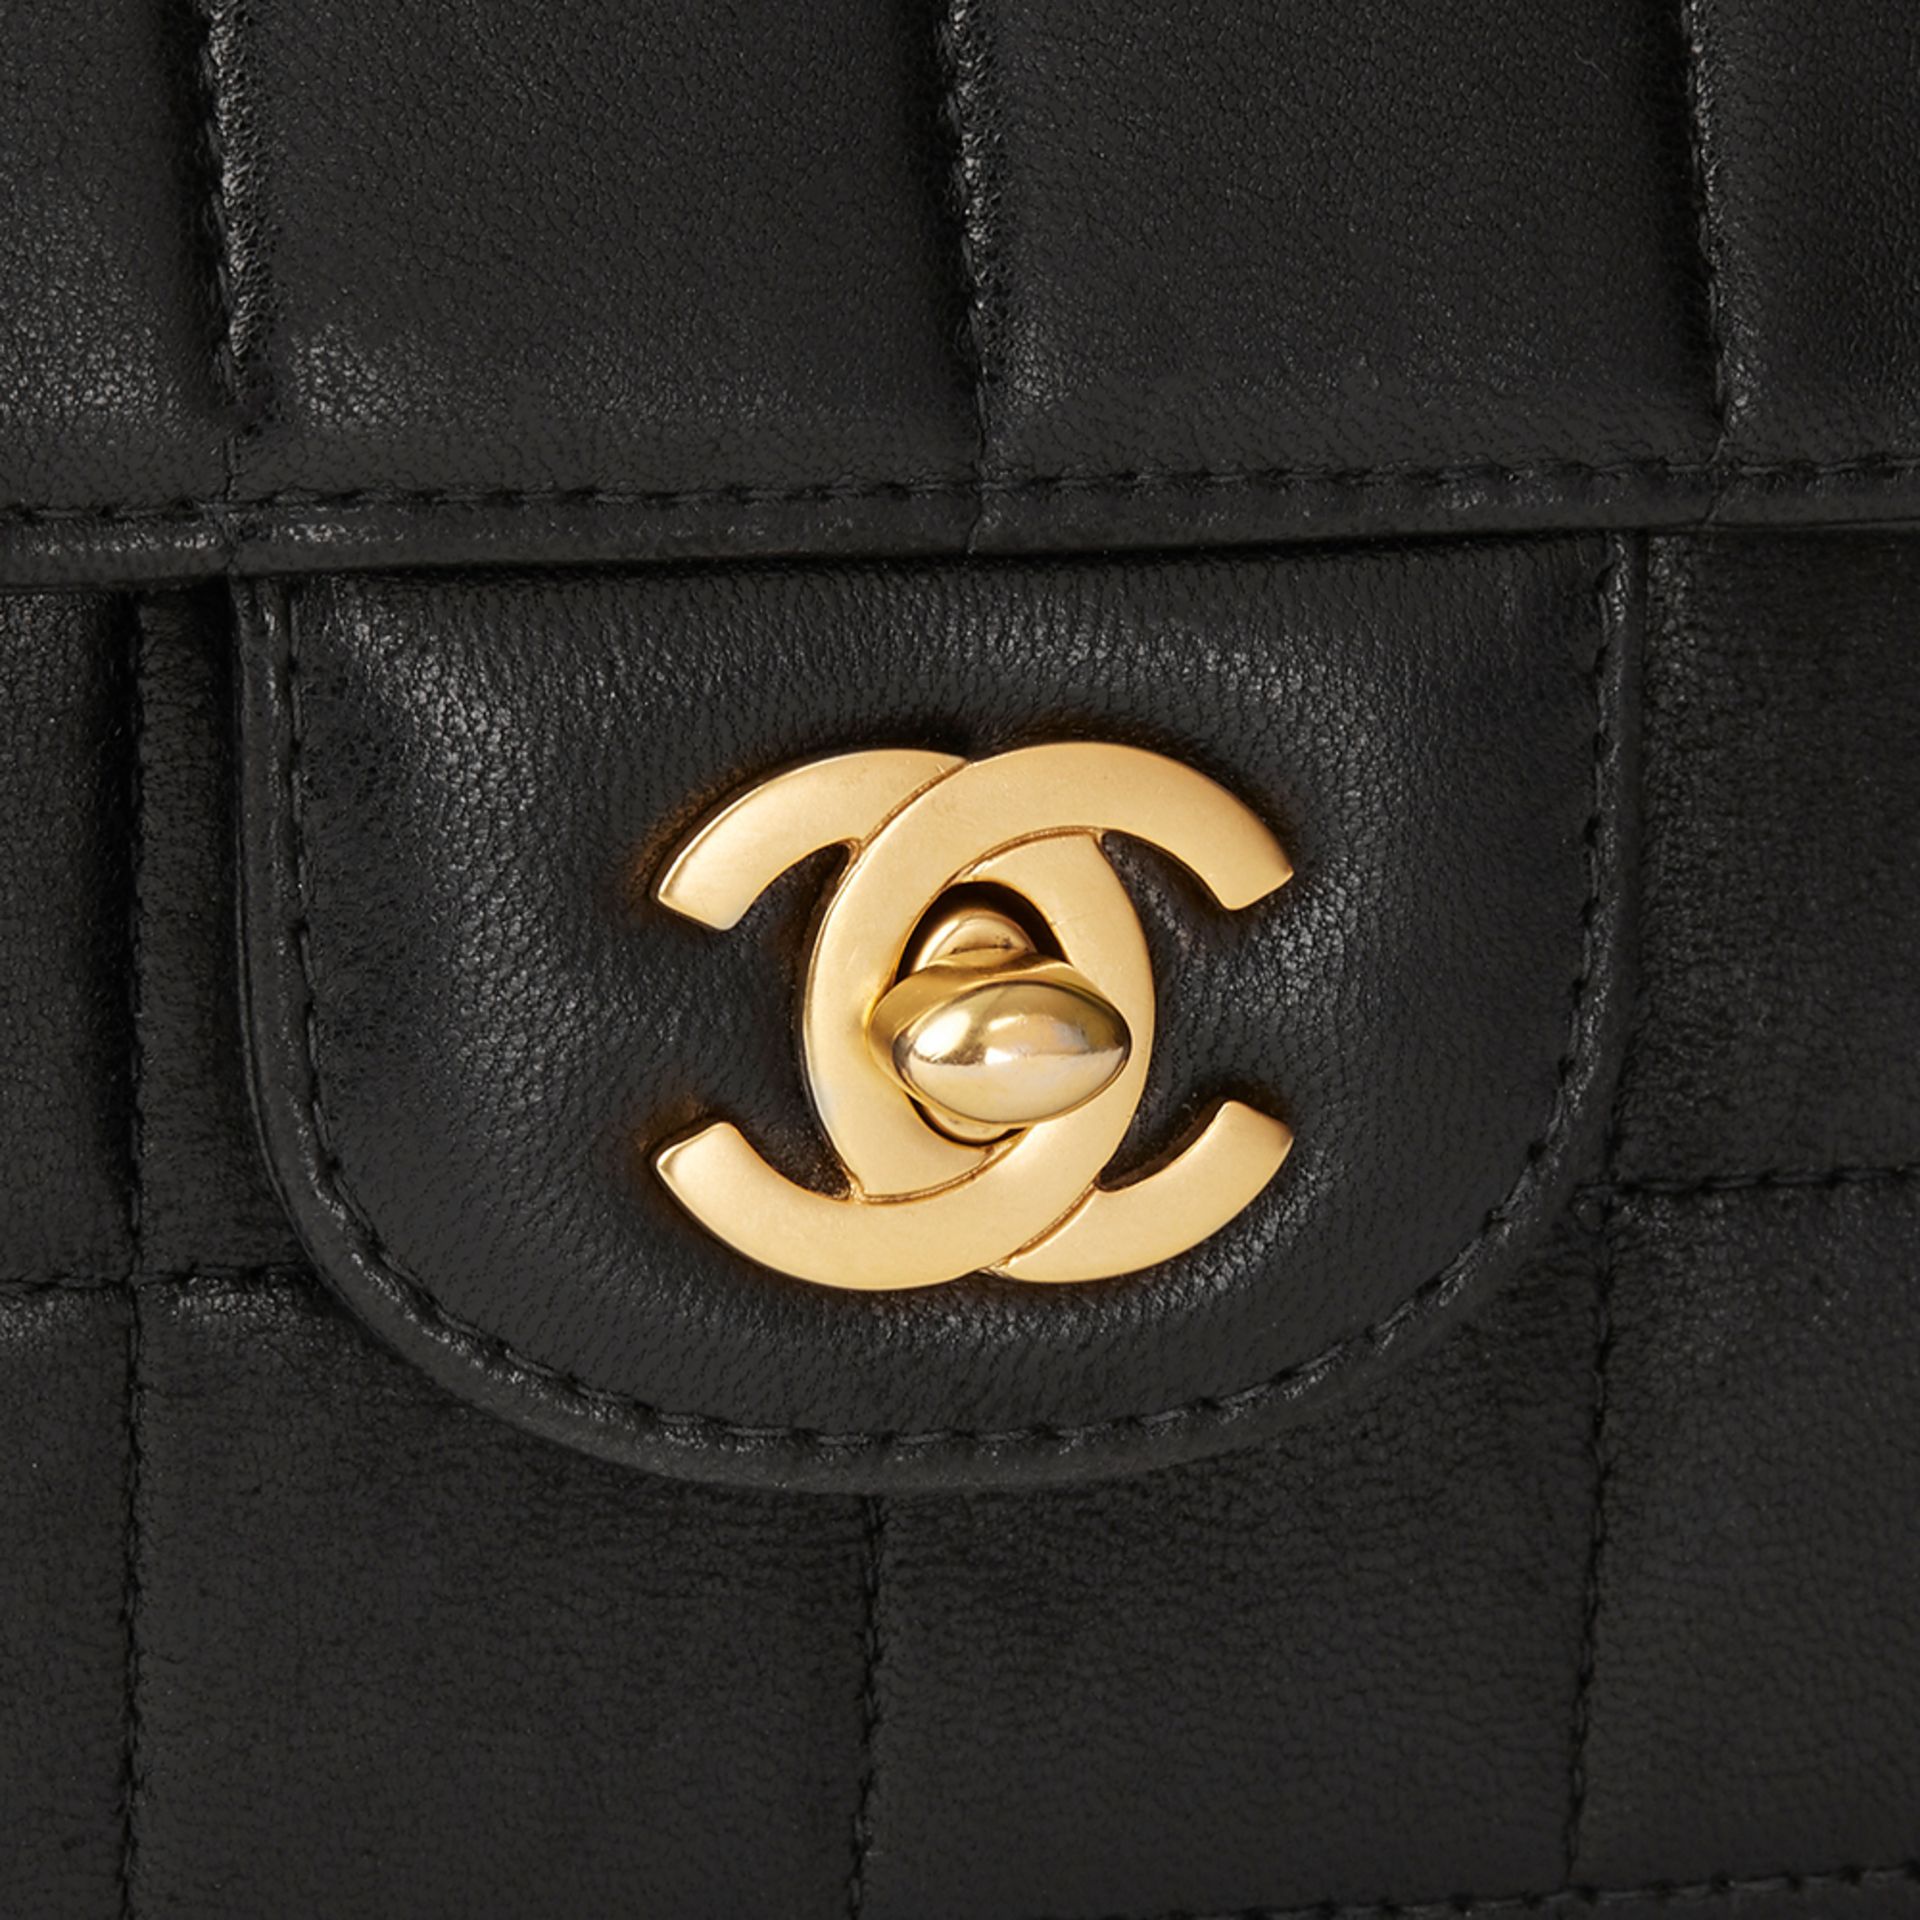 Chanel Black Quilted Lambskin East West Chocolate Bar Flap Bag - Image 11 of 11